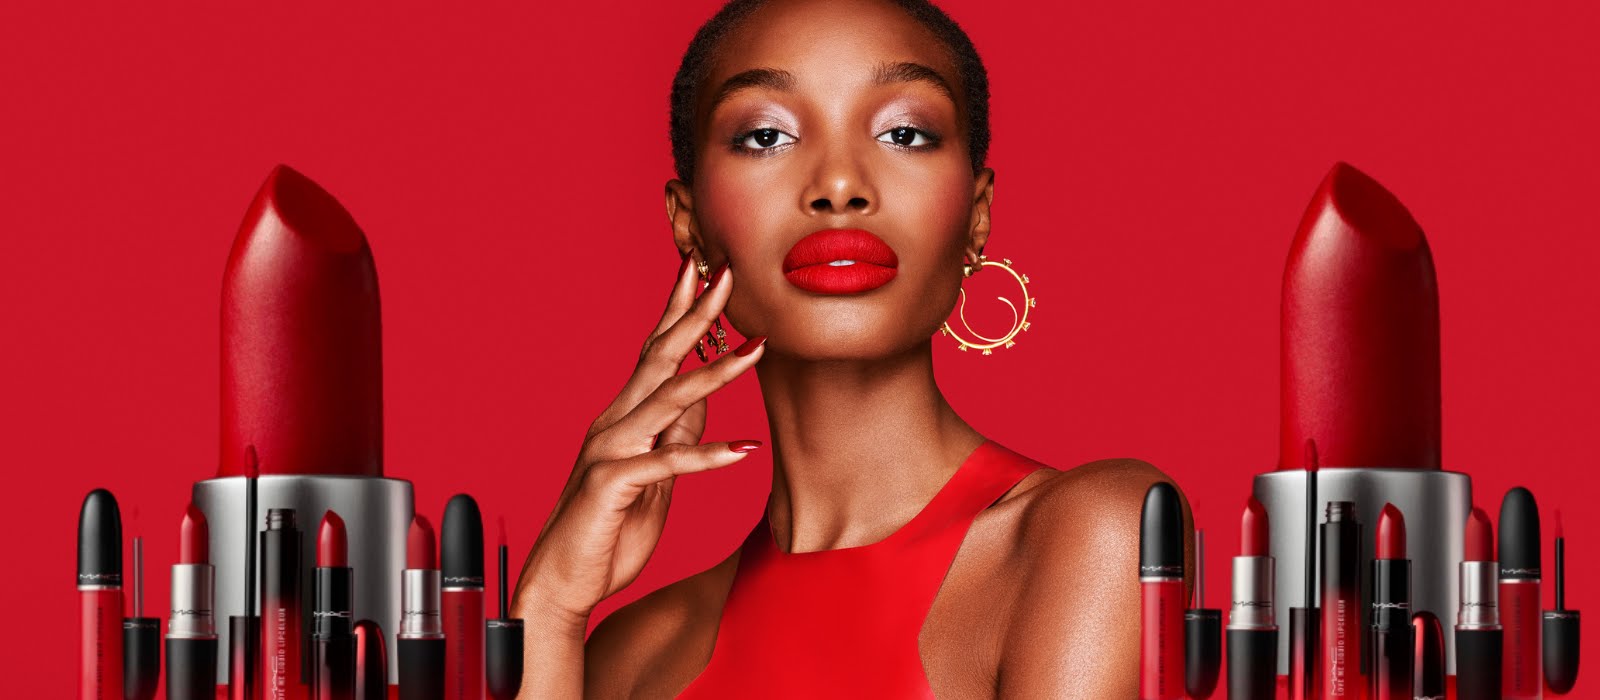 MAC’s best-selling Ruby Woo lipstick now comes in more finishes